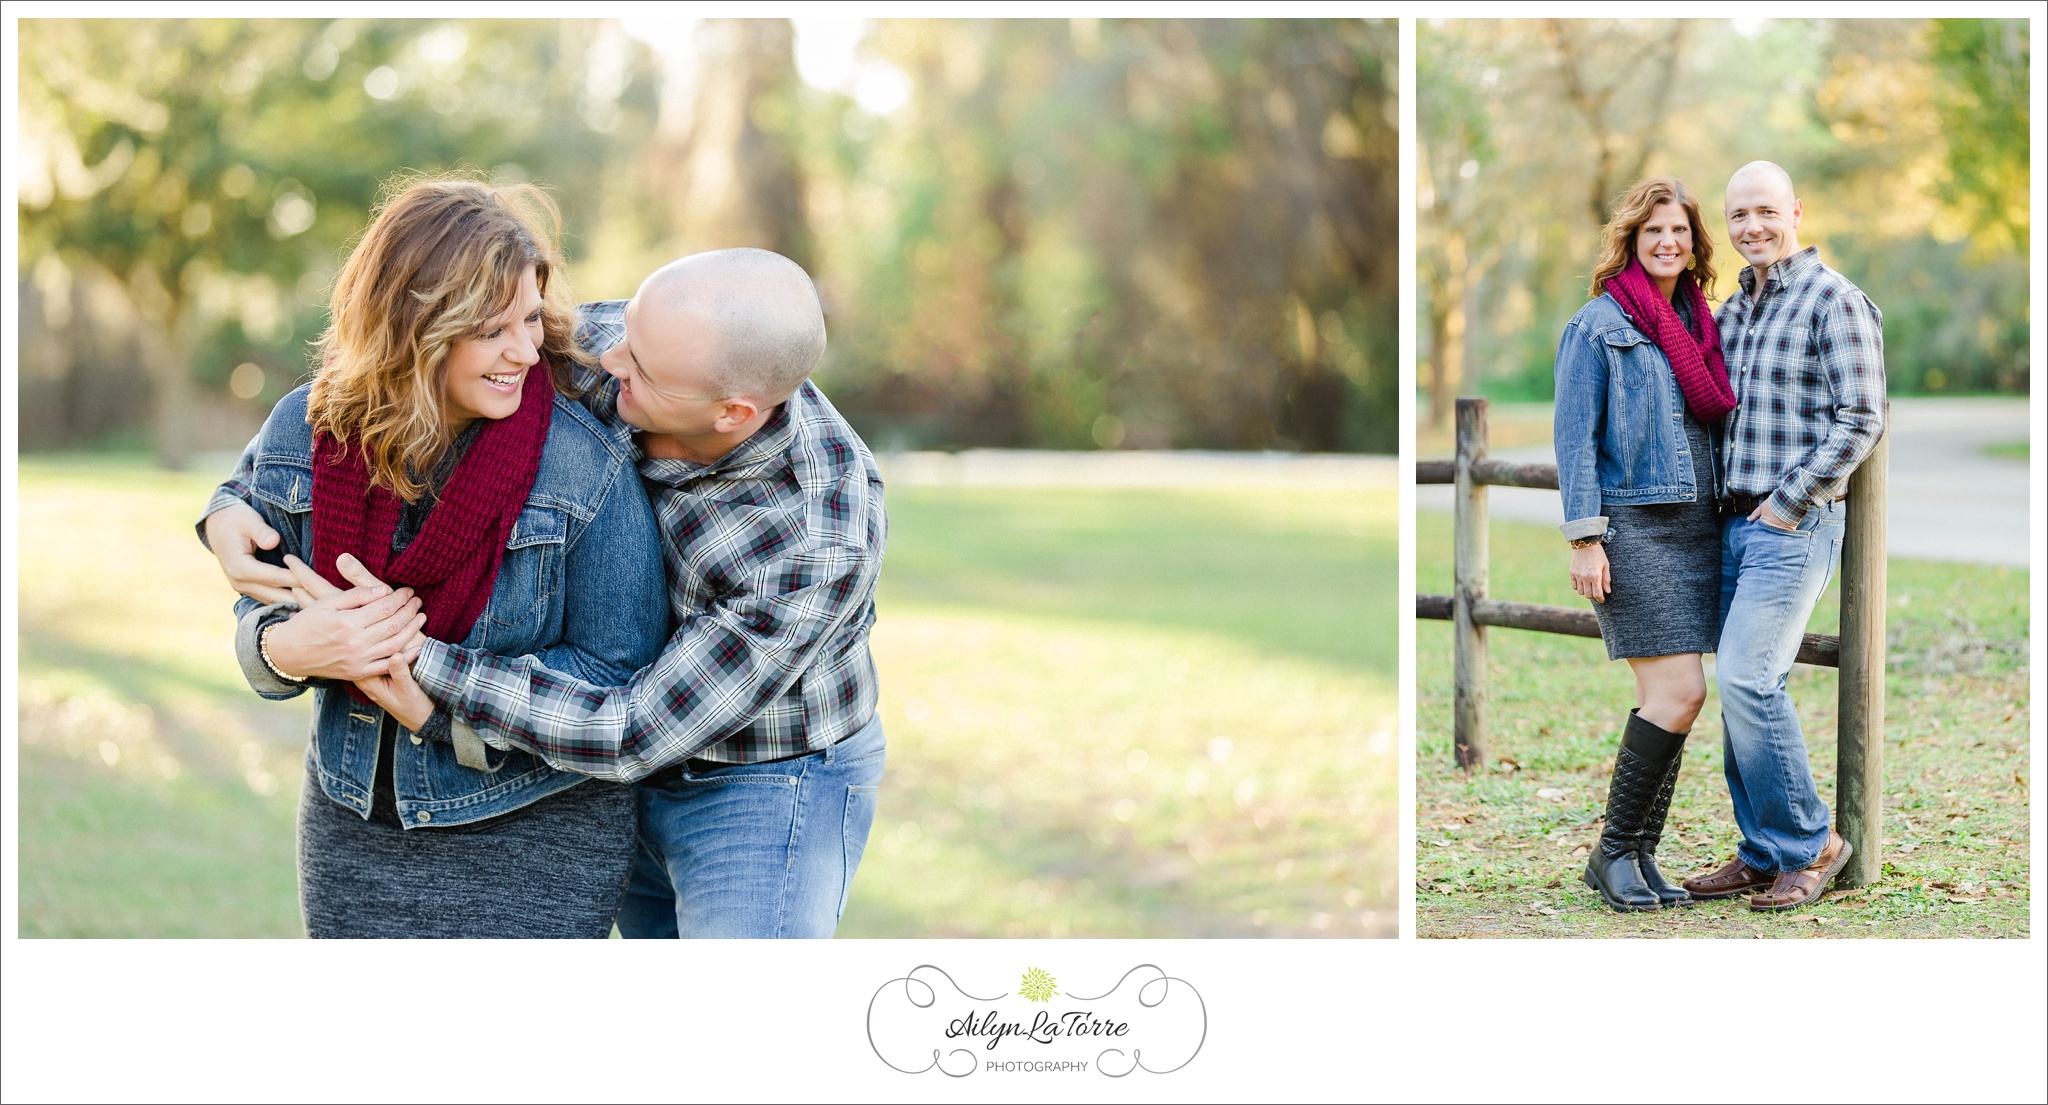 Tampa Anniversary Session | © Ailyn La Torre Photography 2015